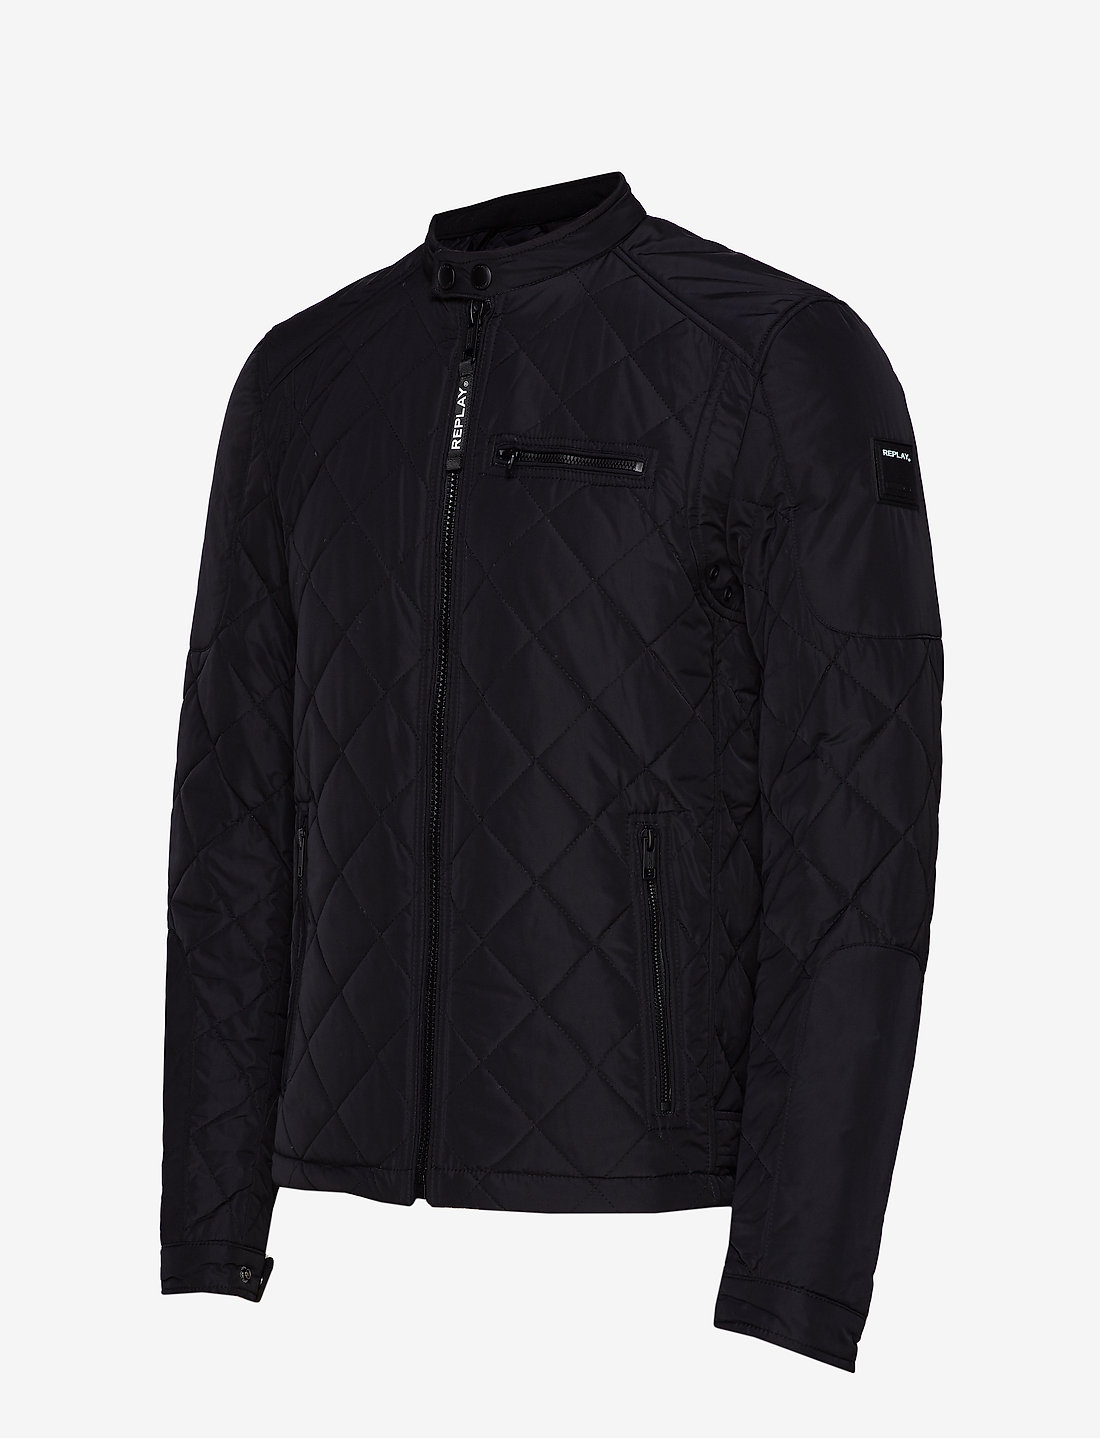 Replay Jacket - 89.94 €. Buy Quilted jackets from Replay online at  Boozt.com. Fast delivery and easy returns